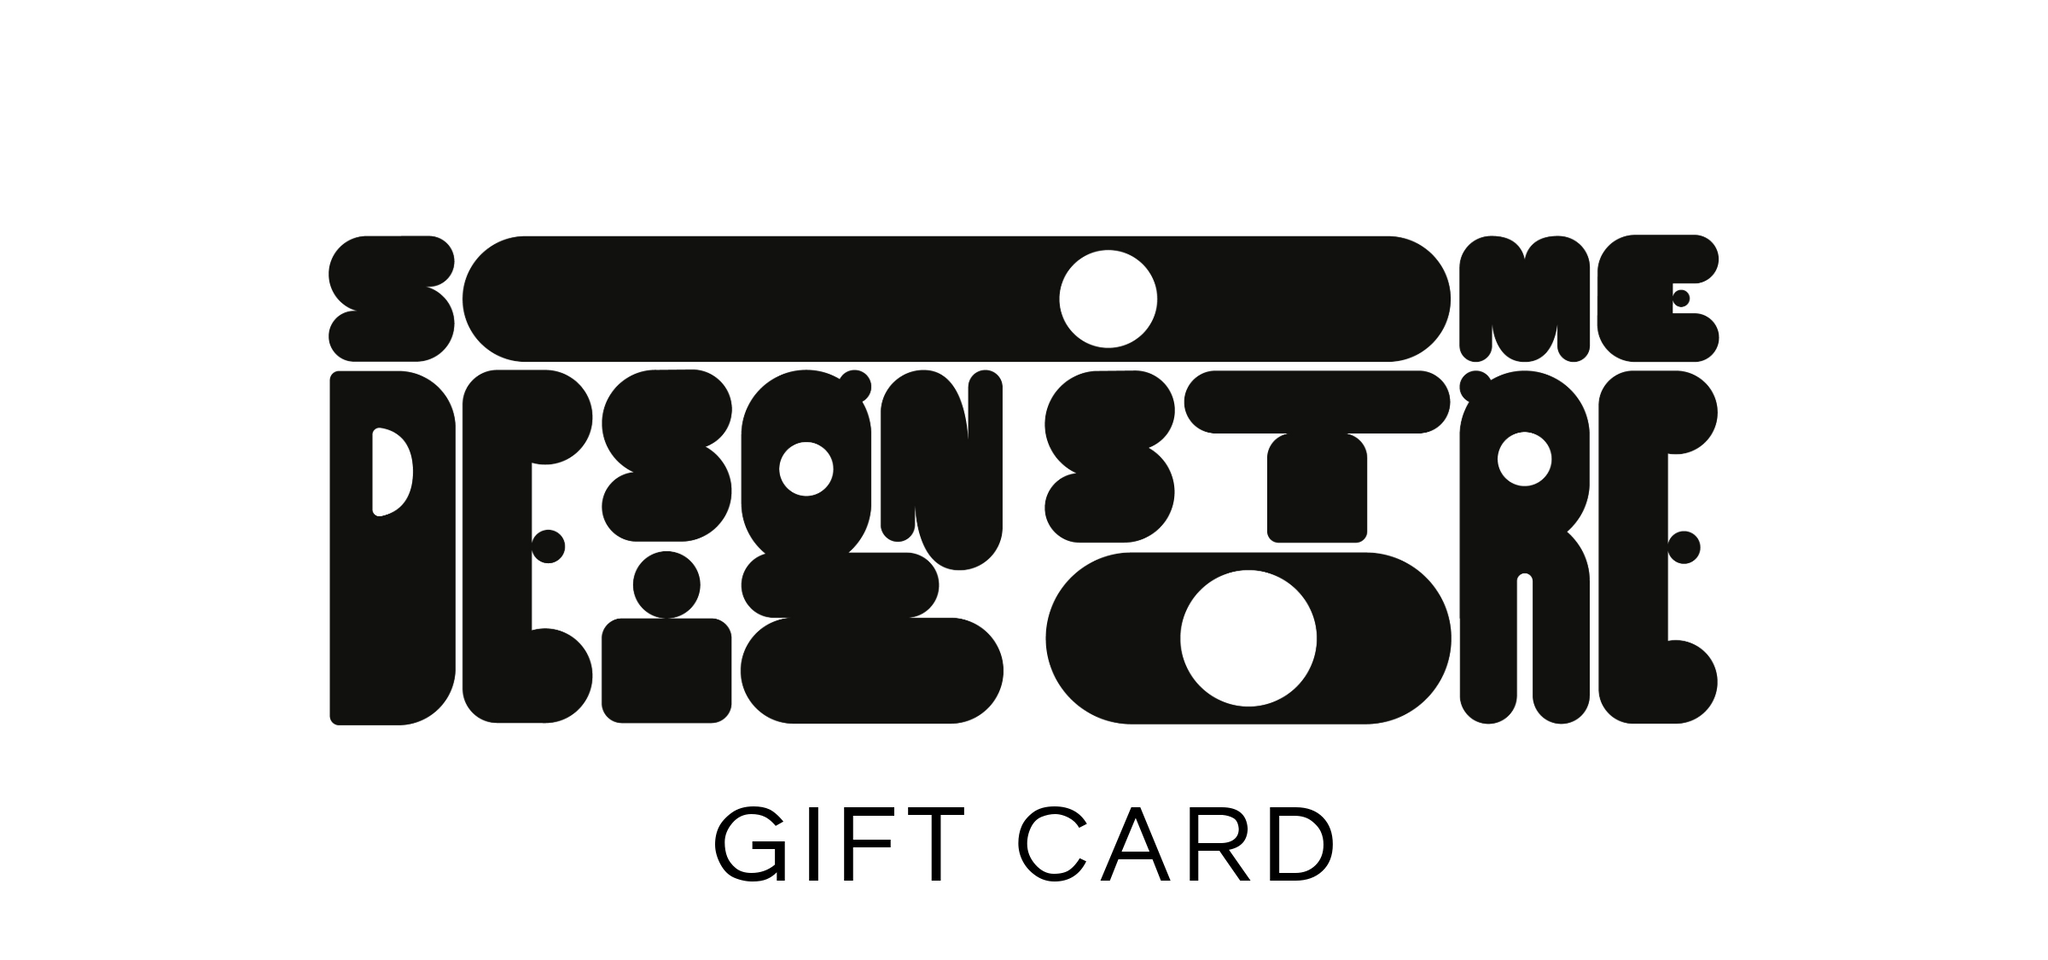 The Some Design Store Gift Card